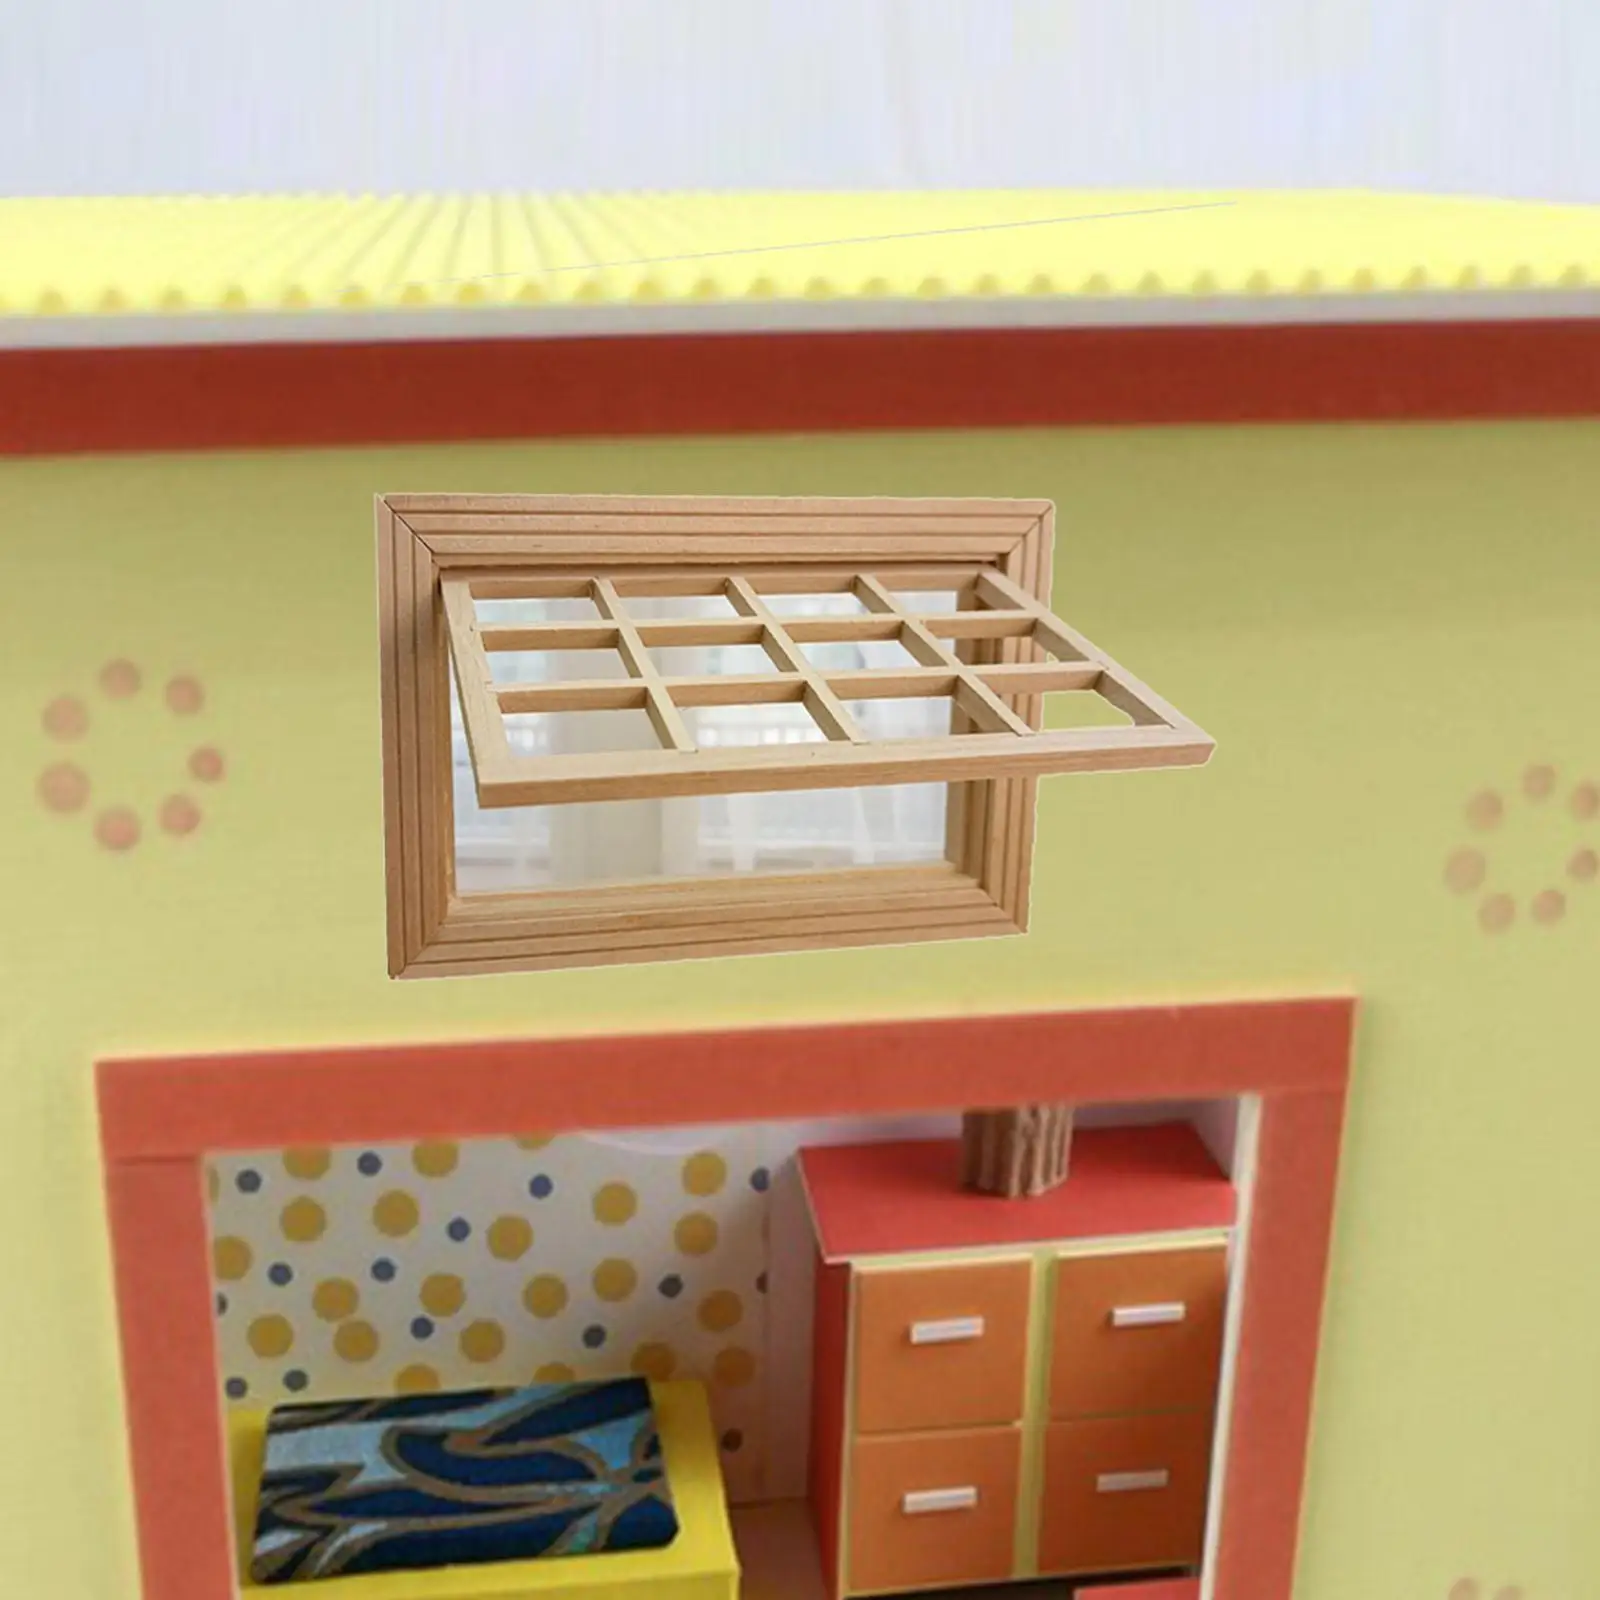 Miniature Dollhouse Furniture Wooden Window Frame Accessories DIY with 12 Panes Model Ornament 1:12 Toddler 3-5 Years Baby Room